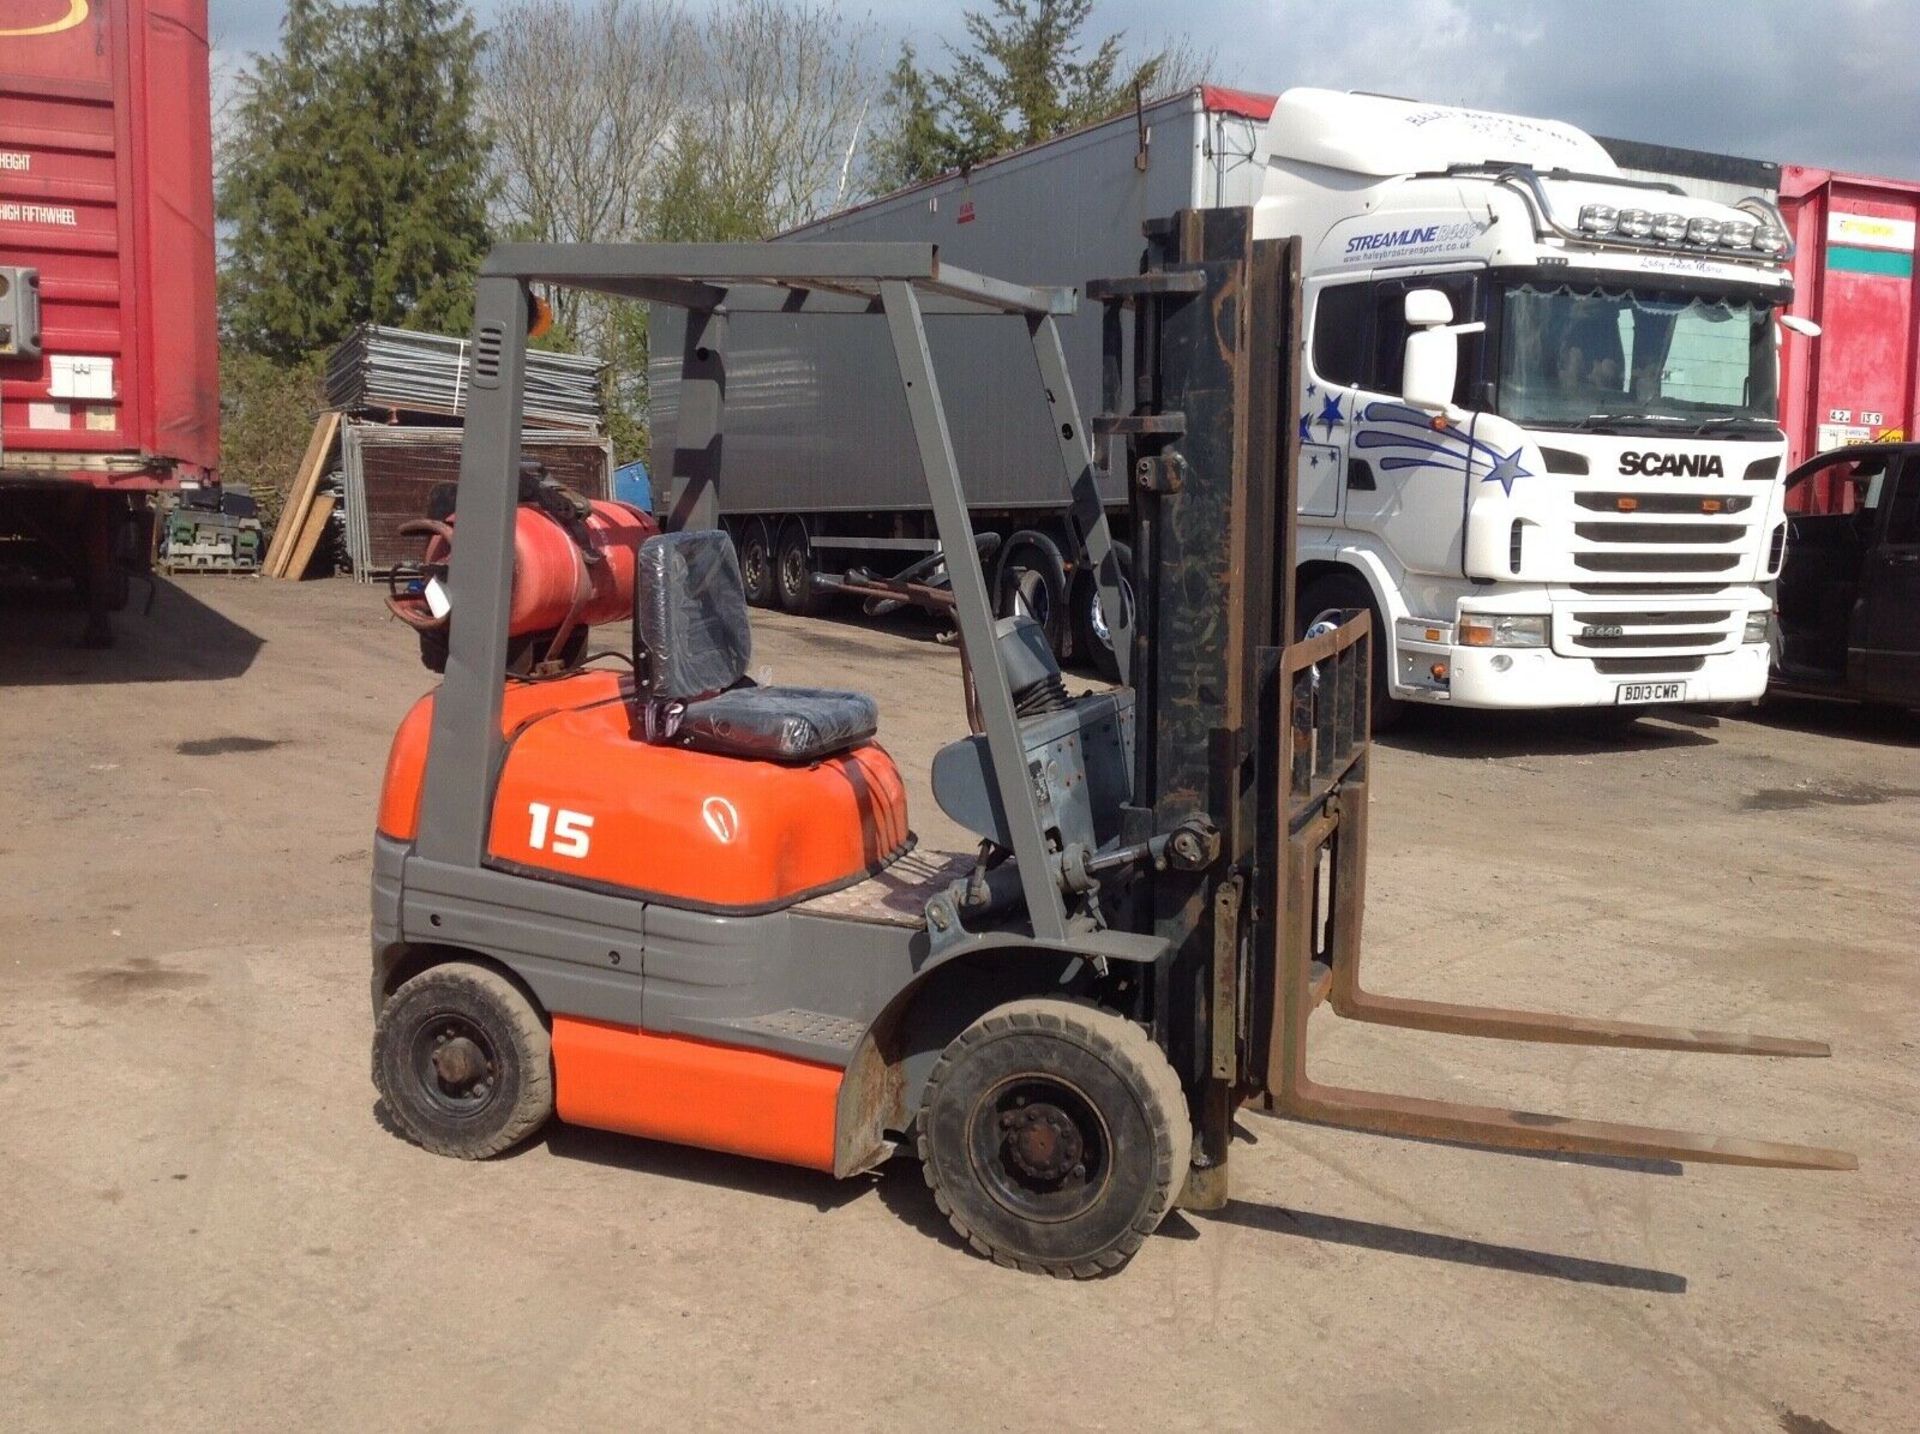 Toyota 1.5 ton gas forklift container spec